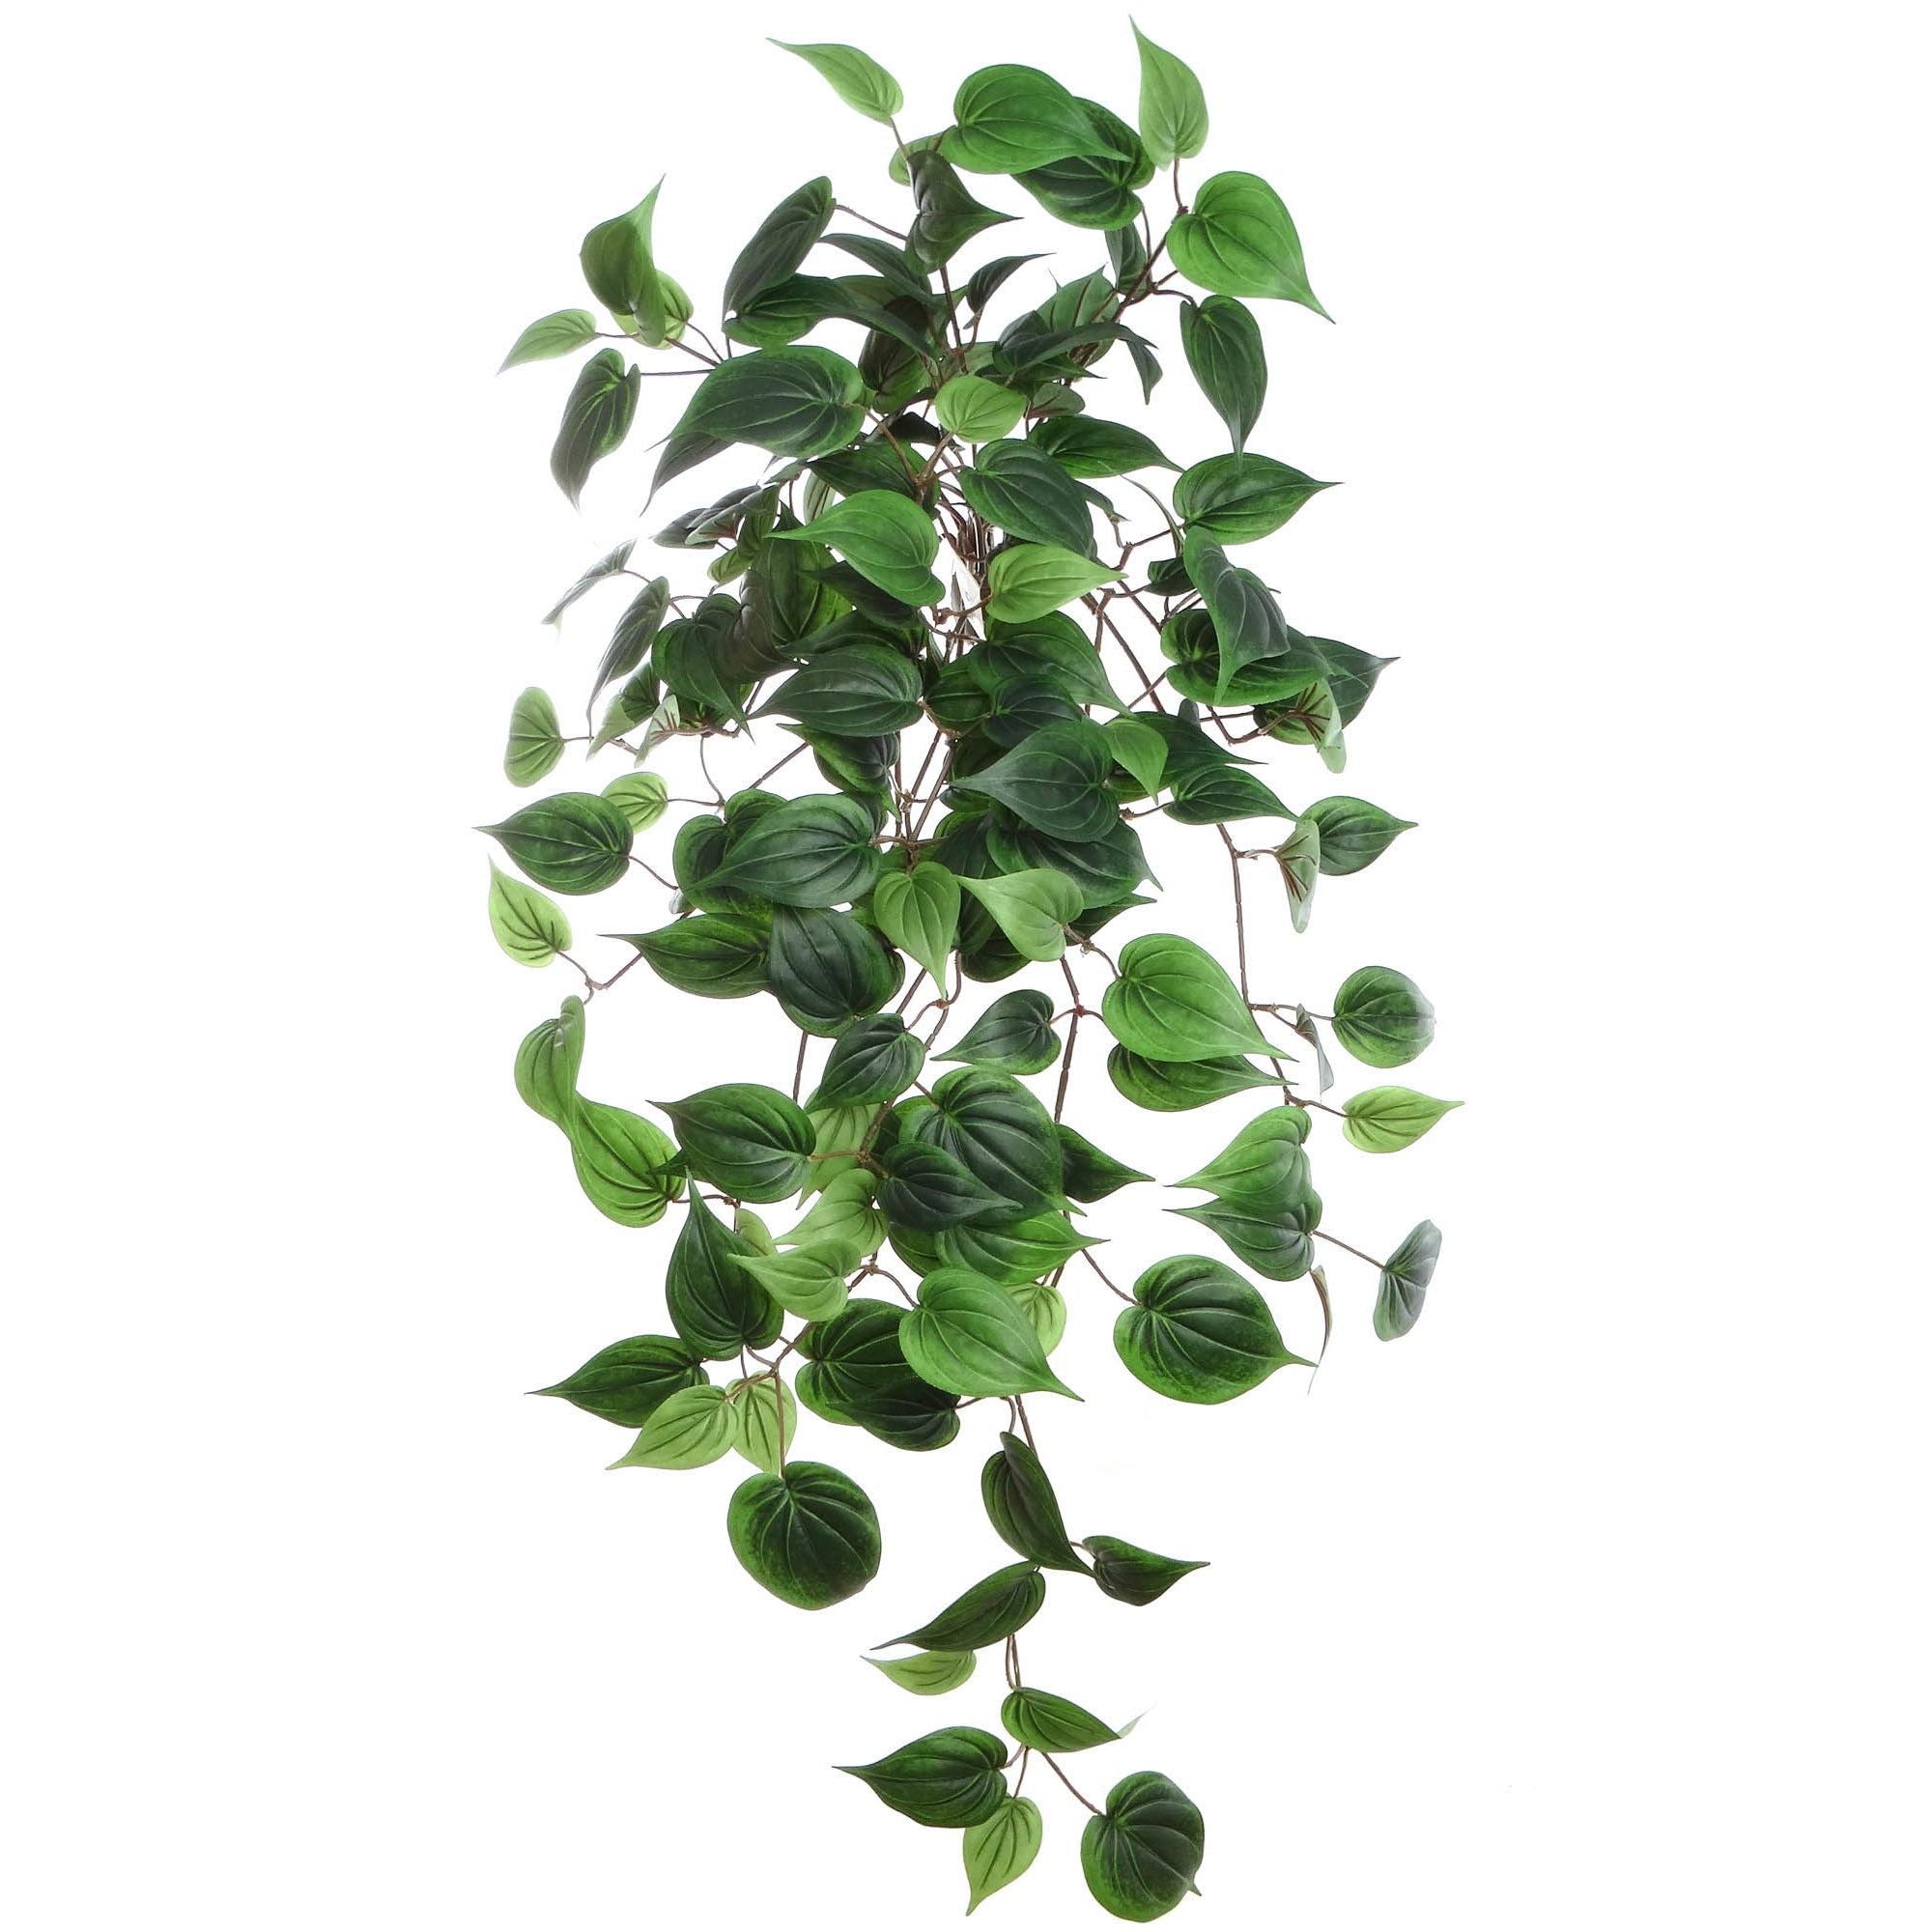 Lush 33" Variegated English Ivy Bush 157L - Realistic Artificial Greenery for Home Decor, Wedding Arrangements, and DIY Crafts